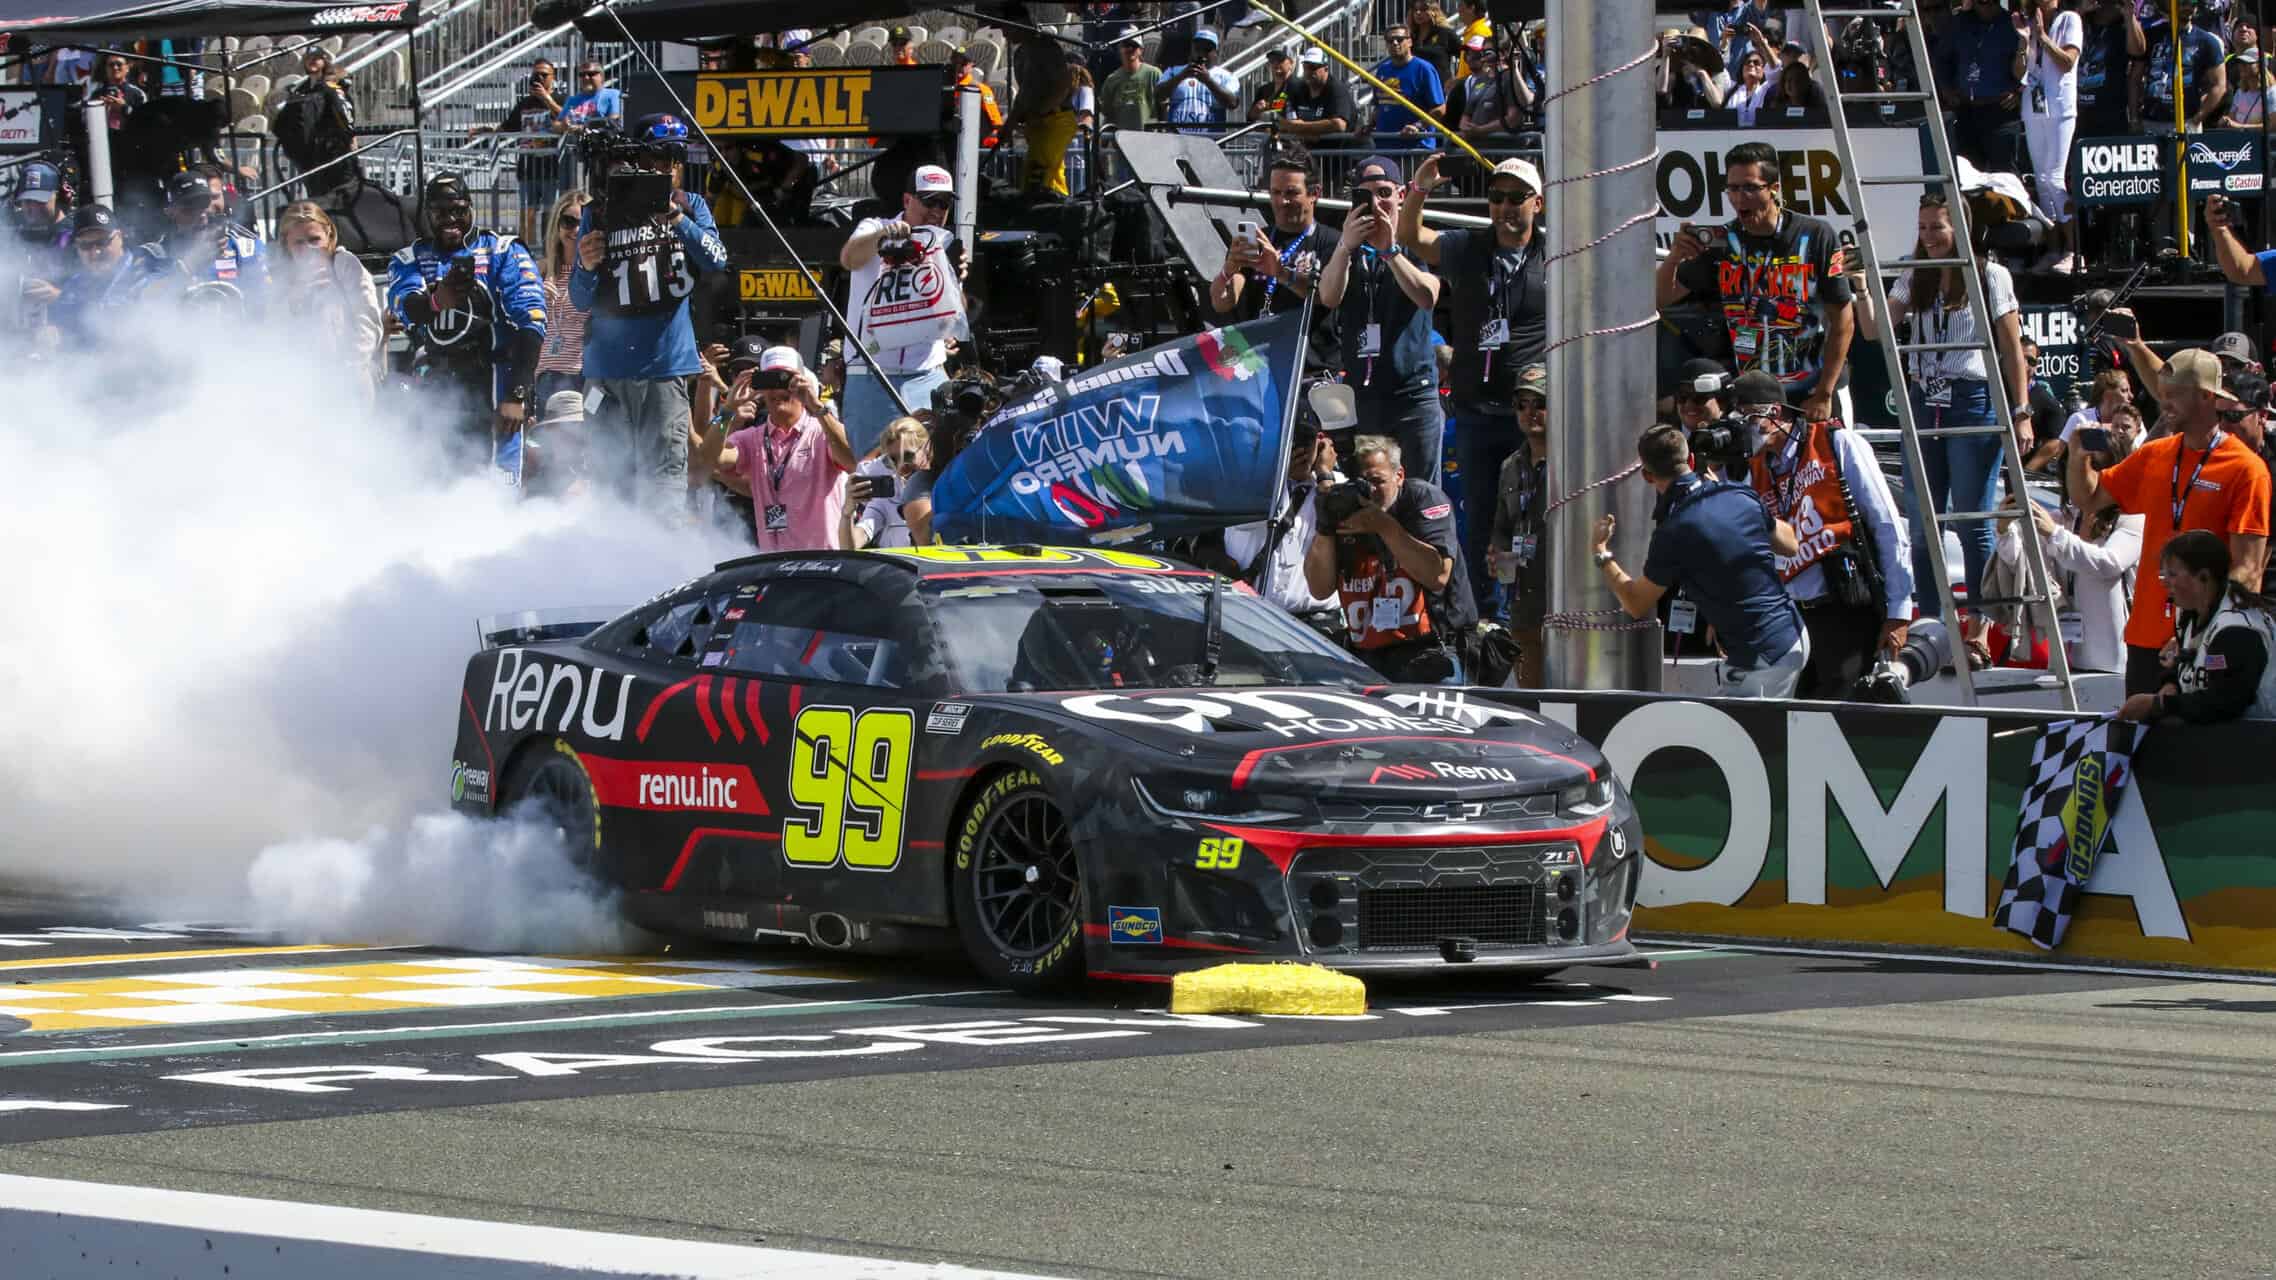 Daniel Suarez wins at Sonoma Raceway in the 2022 Toyota Save Mart 350 for Trackhouse Racing in the NASCAR Cup Series.